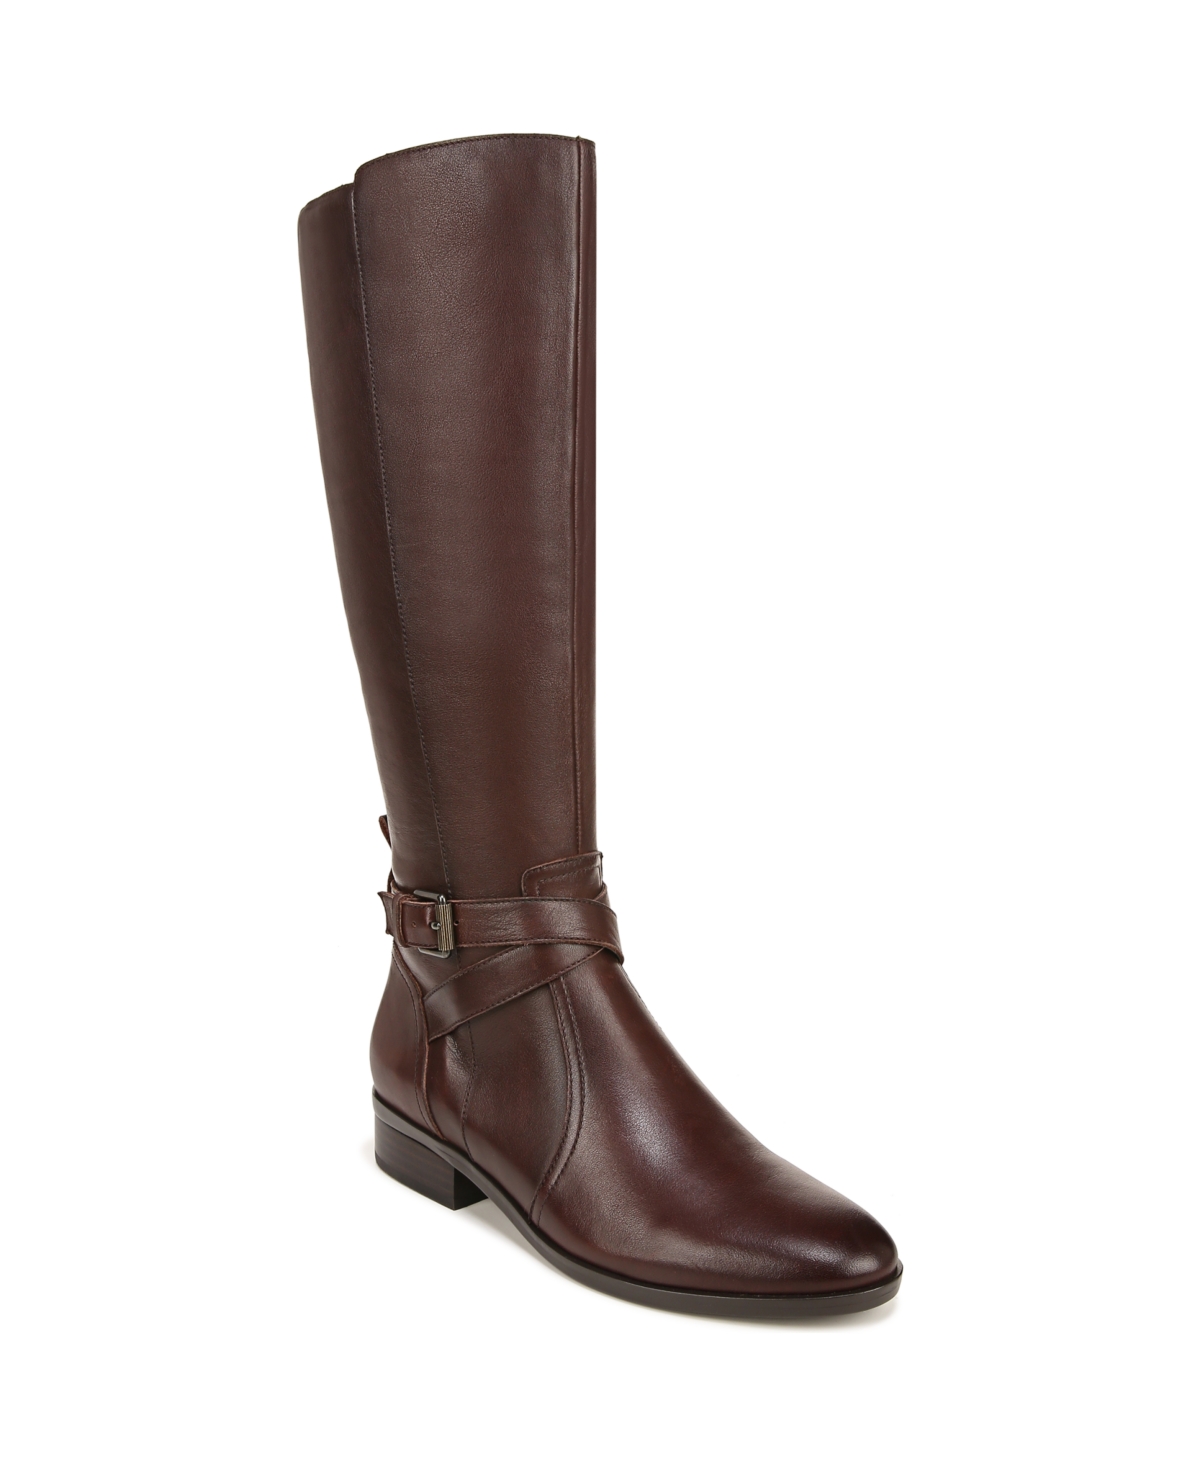 Rena Narrow Calf Riding Boots - Cider Leather